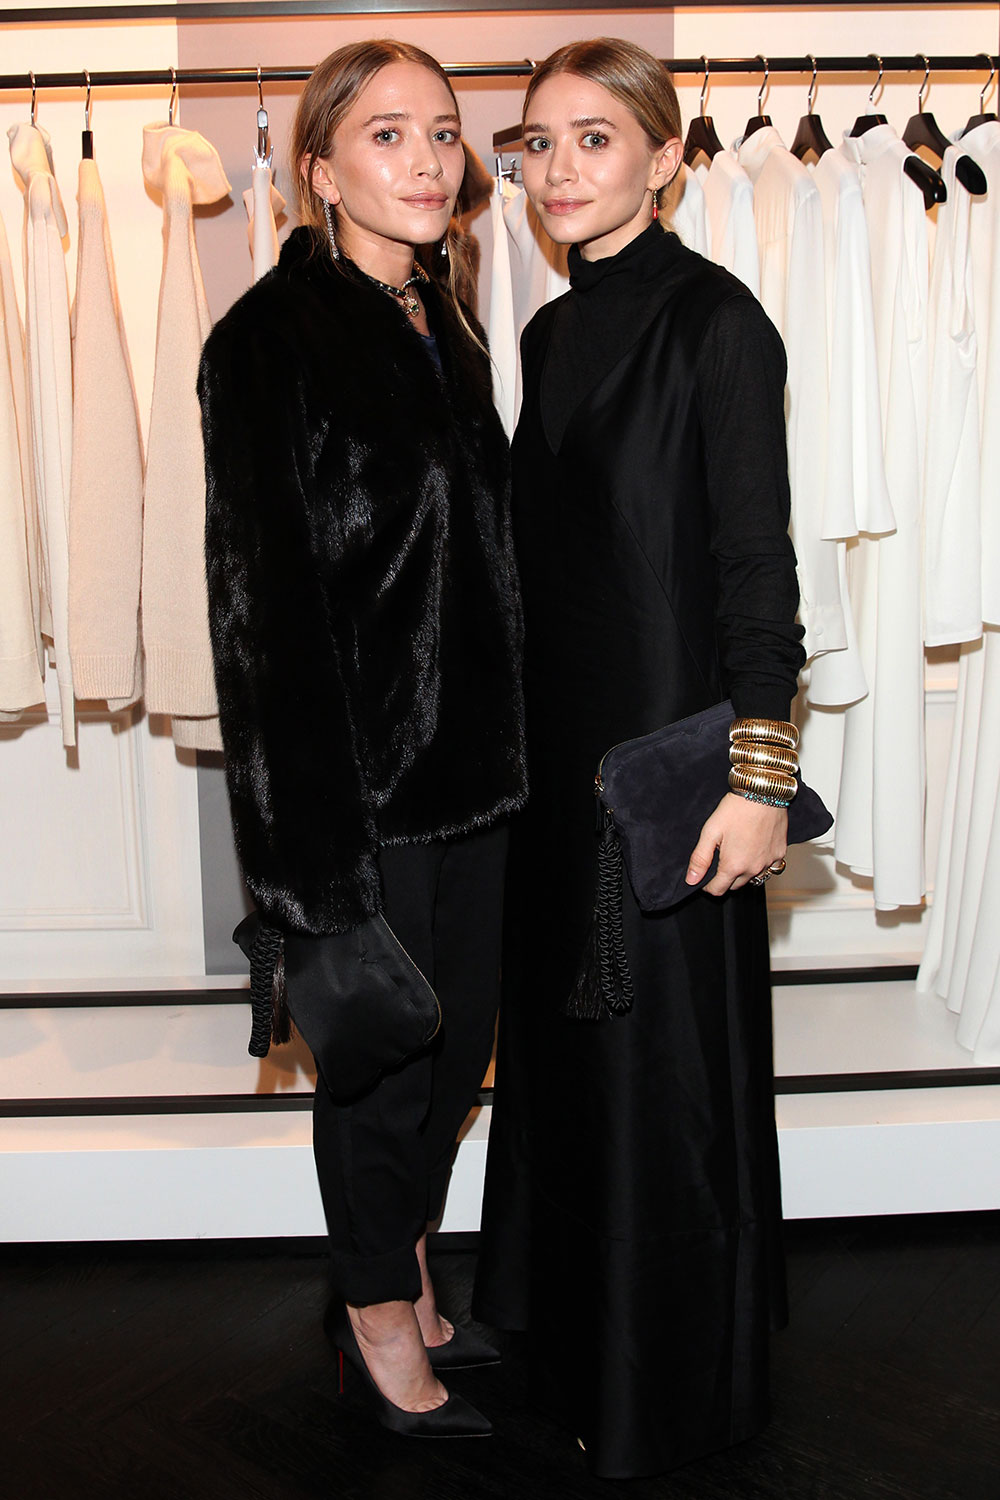 Mary-Kate and Ashley Olsen at a presentation of The Row in 2014.